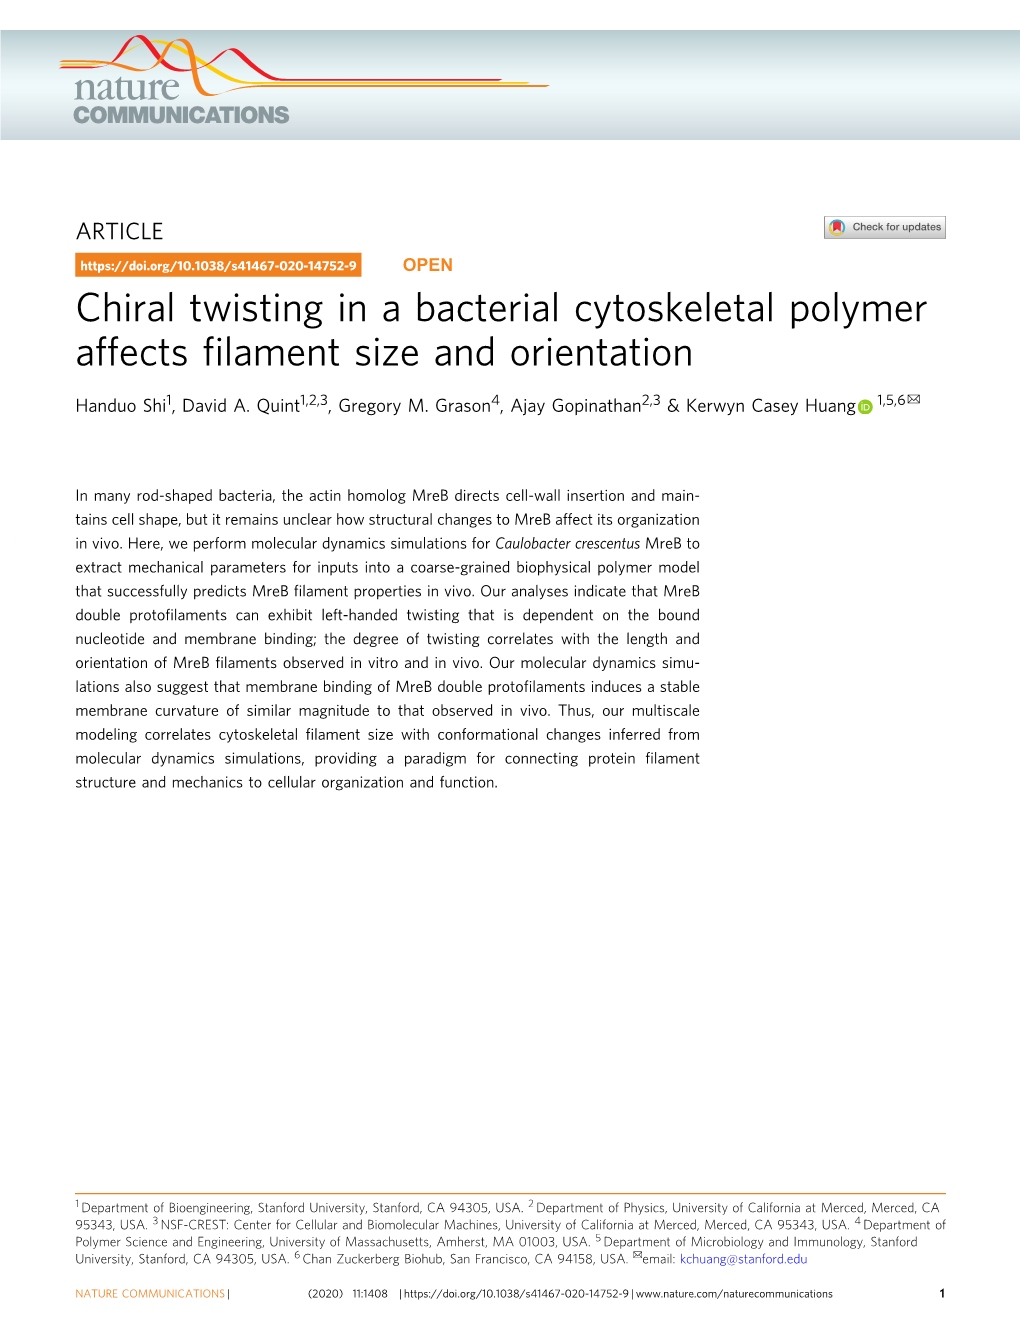 Chiral Twisting in a Bacterial Cytoskeletal Polymer Affects Filament Size and Orientation